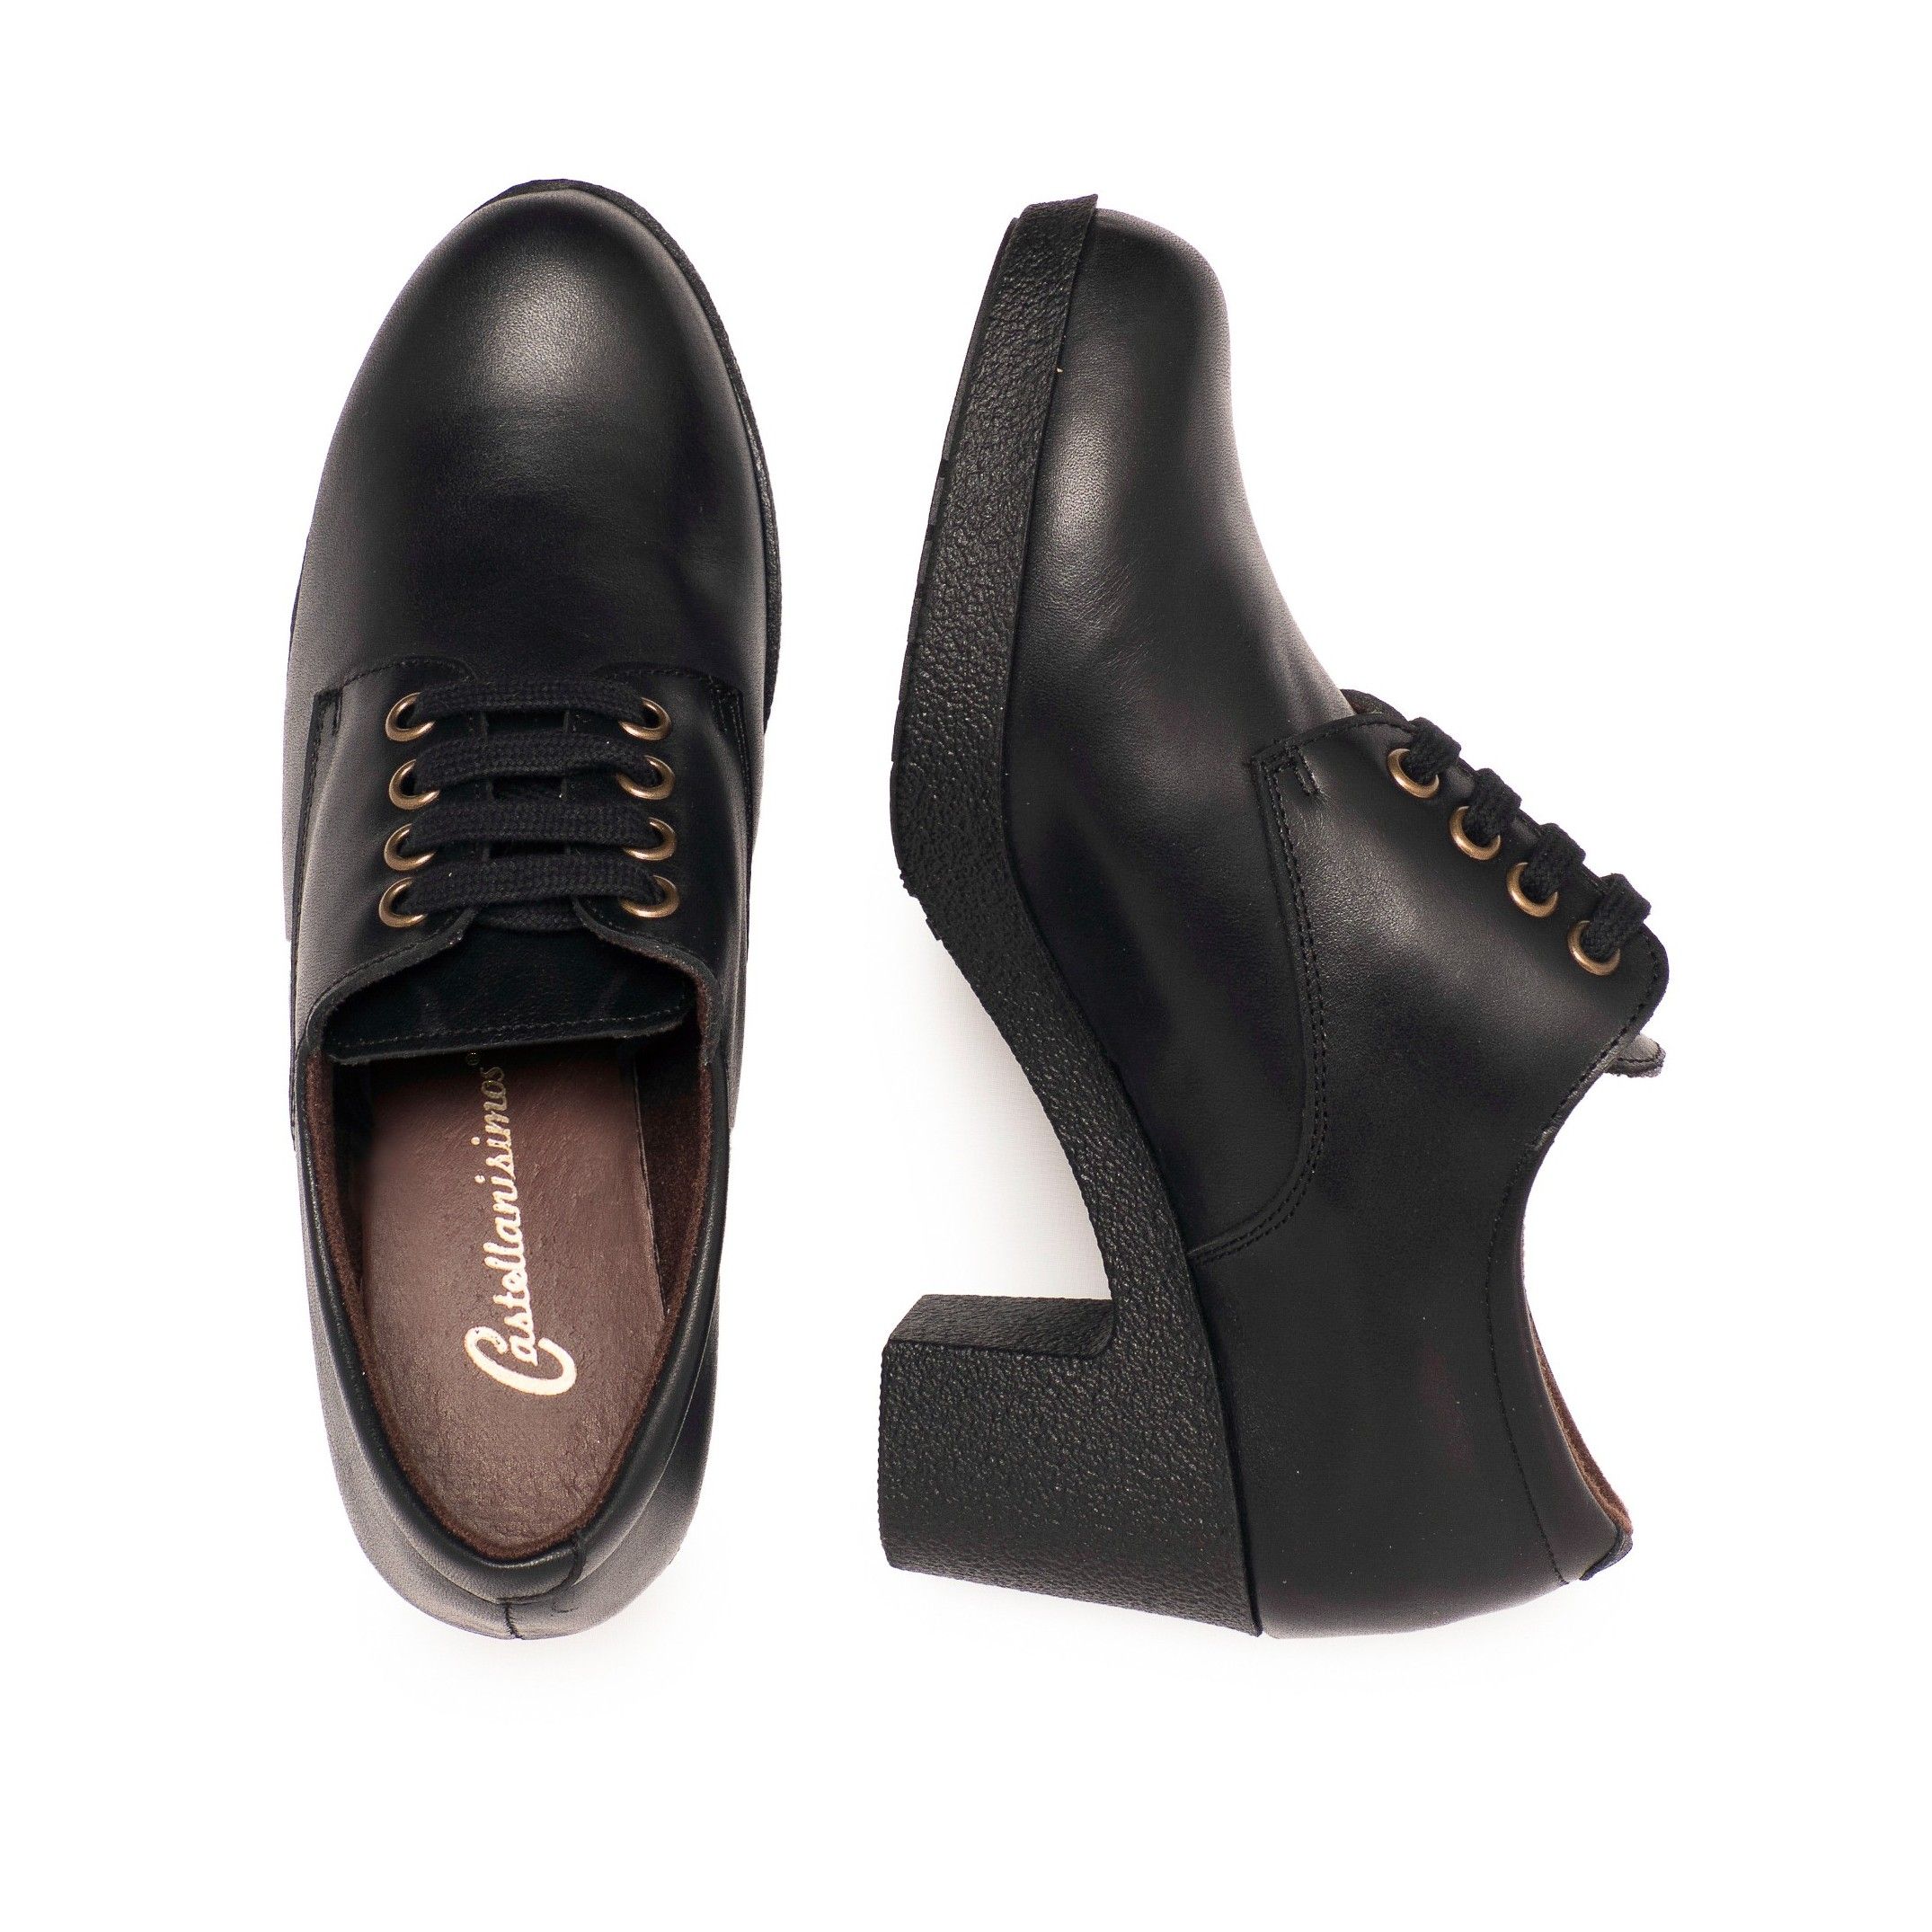 Blucher shoes to dress for women. Upper and inner made of leather. Laces closure. Made in Spain.